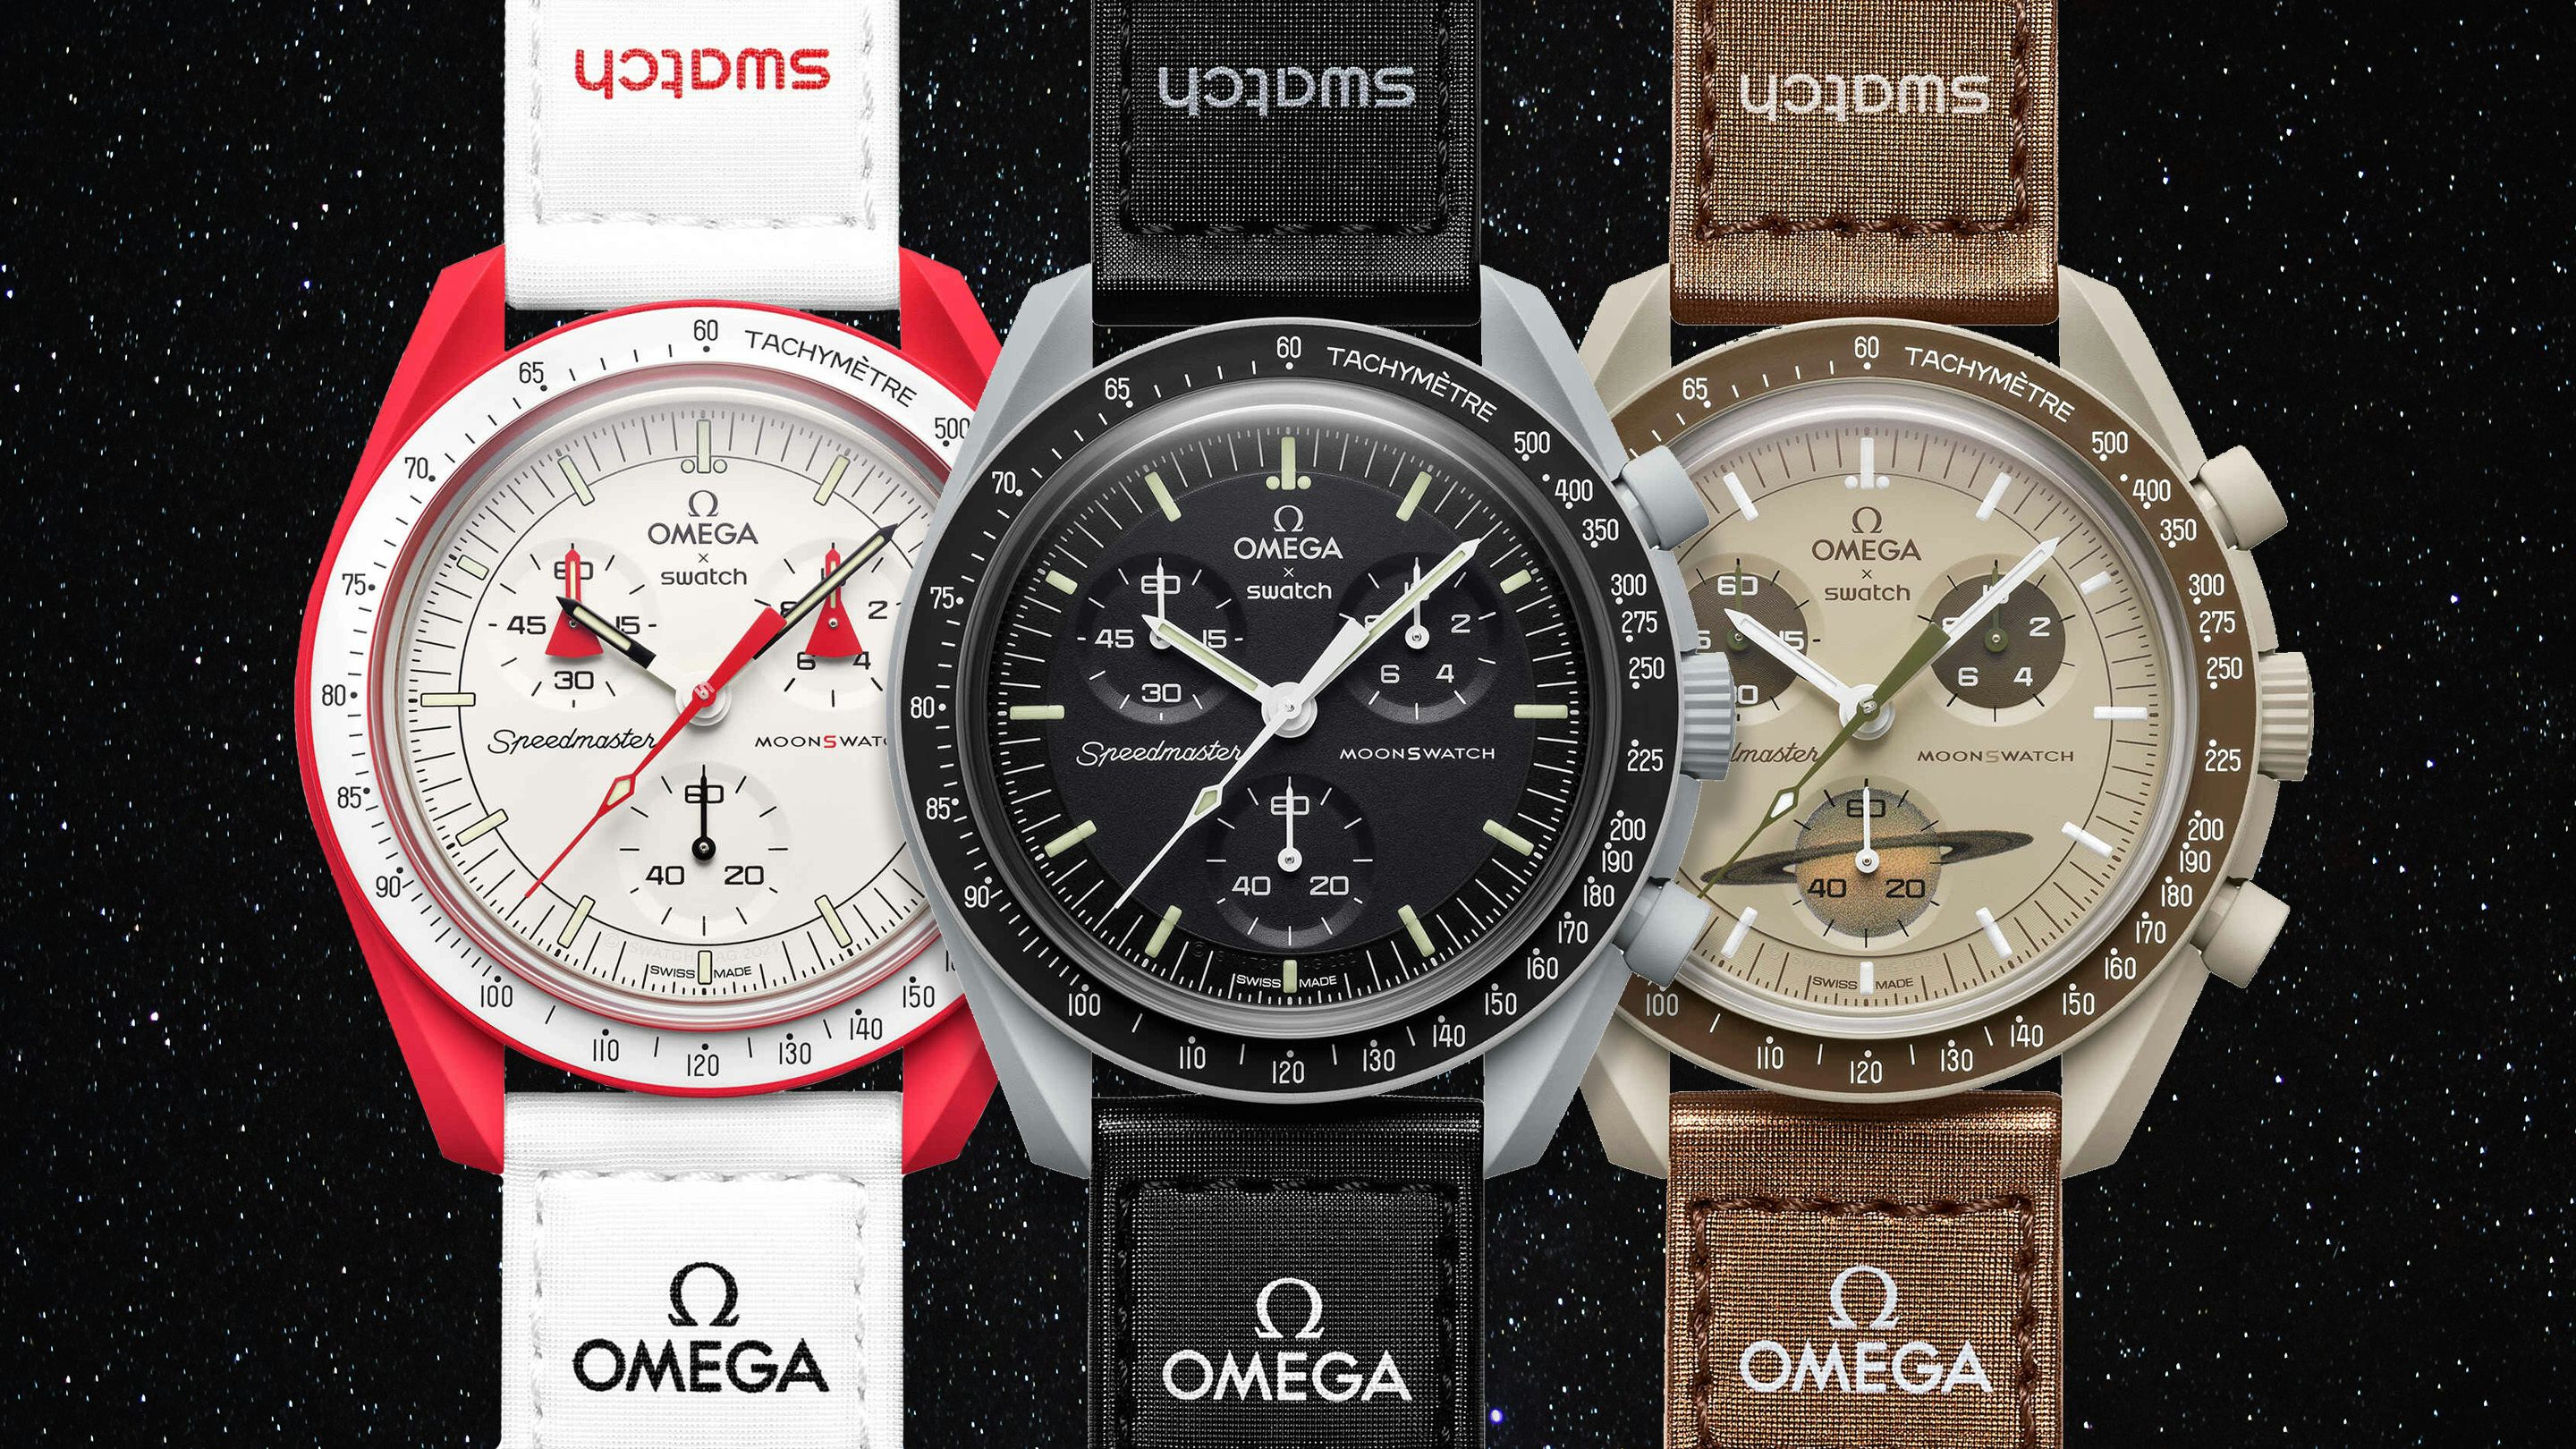 Omega moonwatch swatch